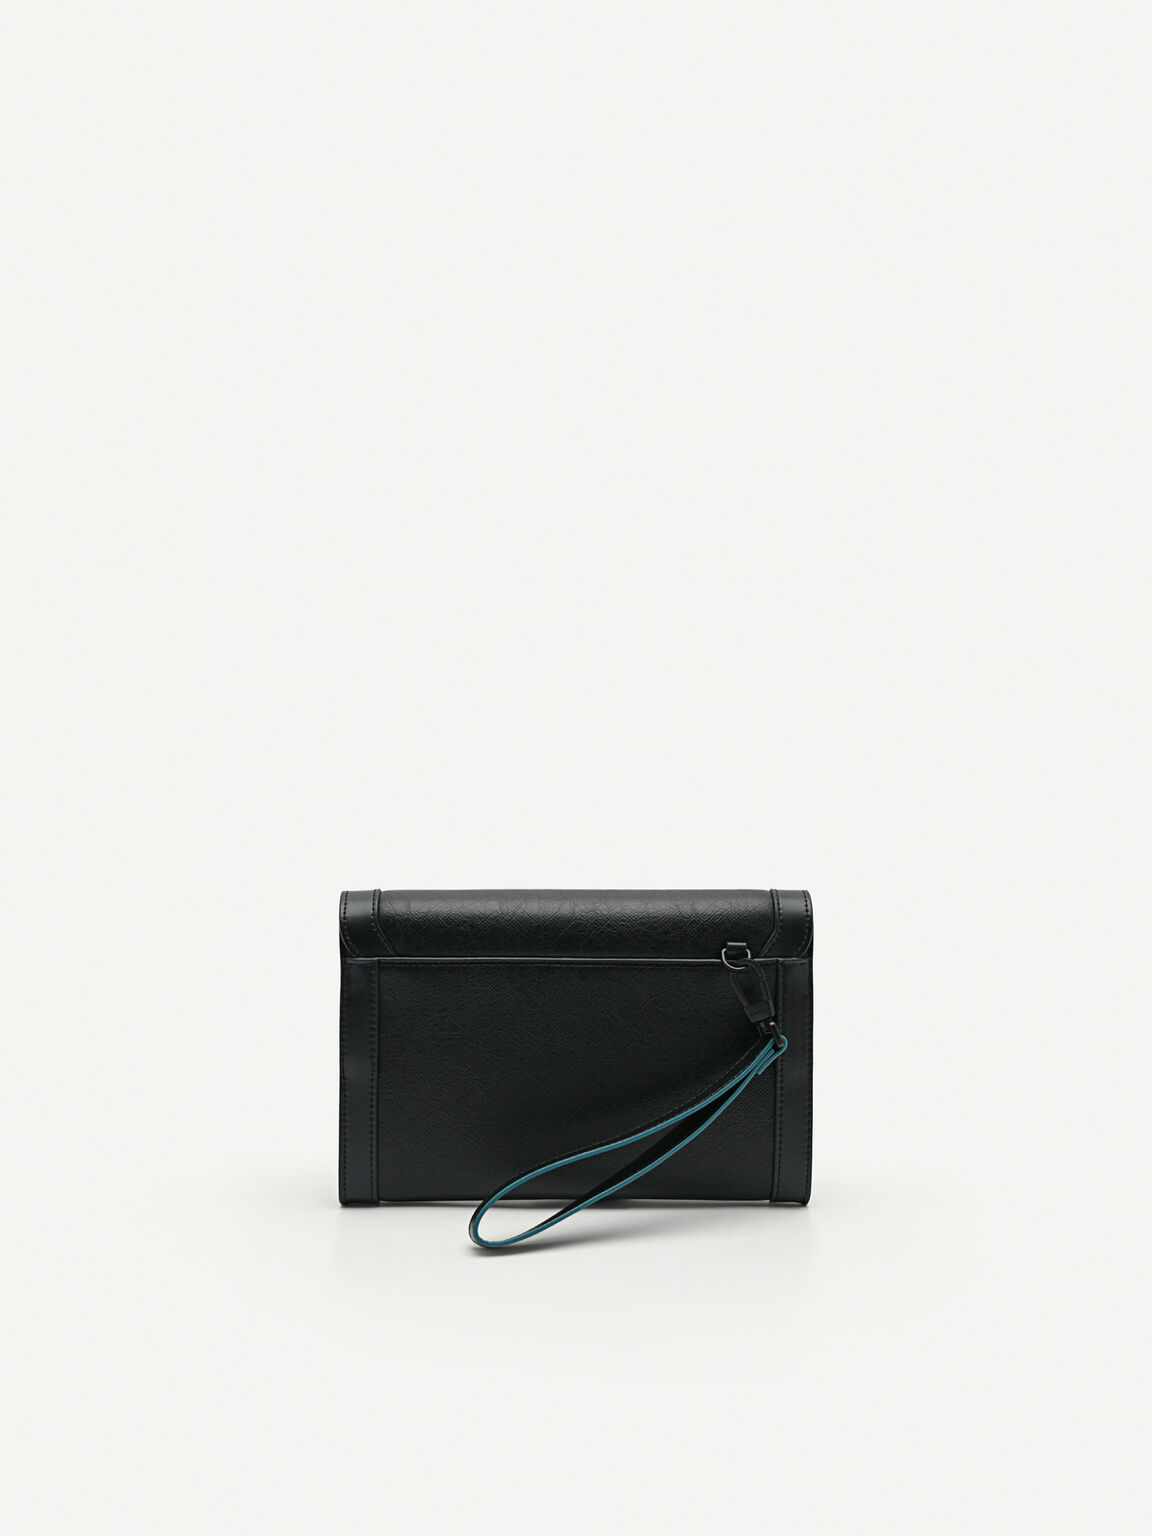 Suede Clutch with Single Handle Strap, Black